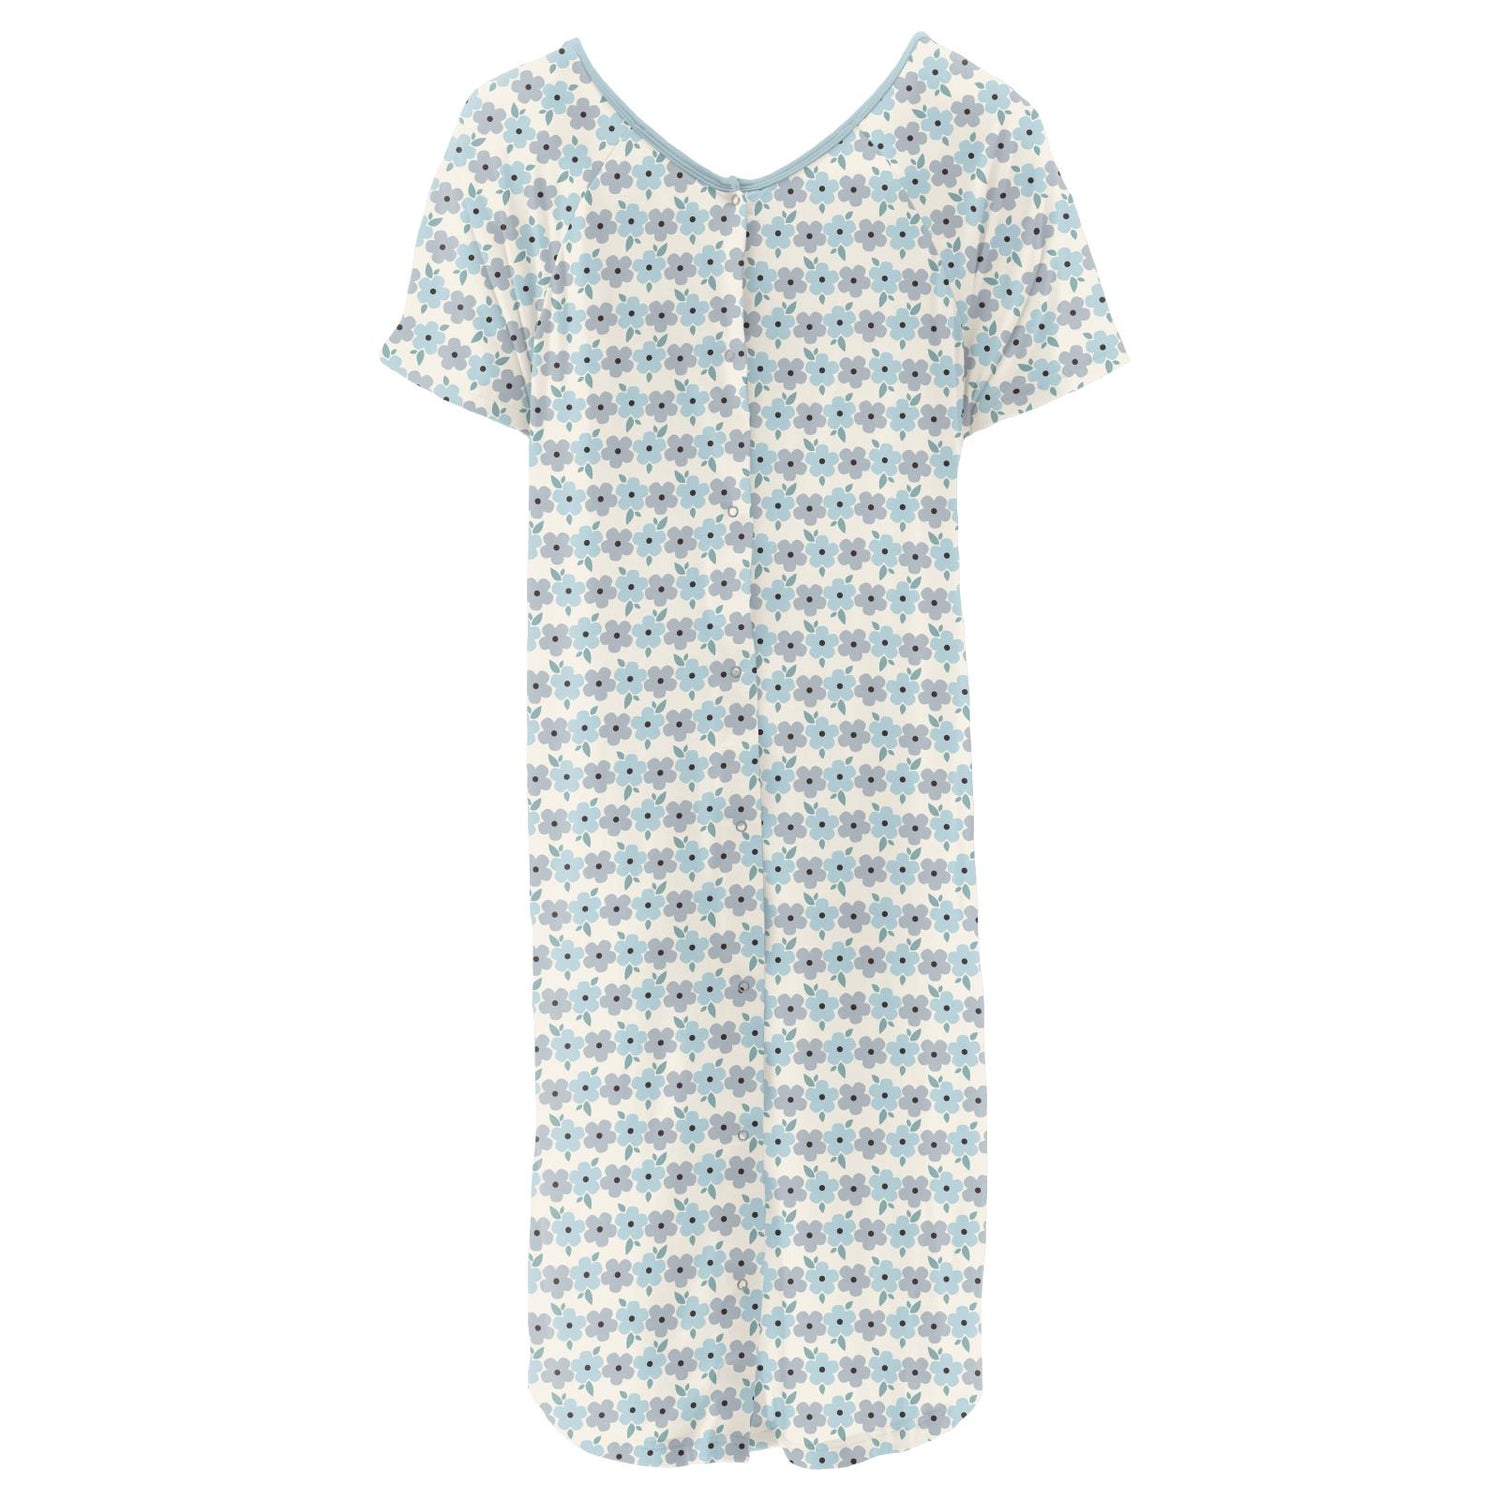 Women's Print Hospital Gown in Natural Hydrangea